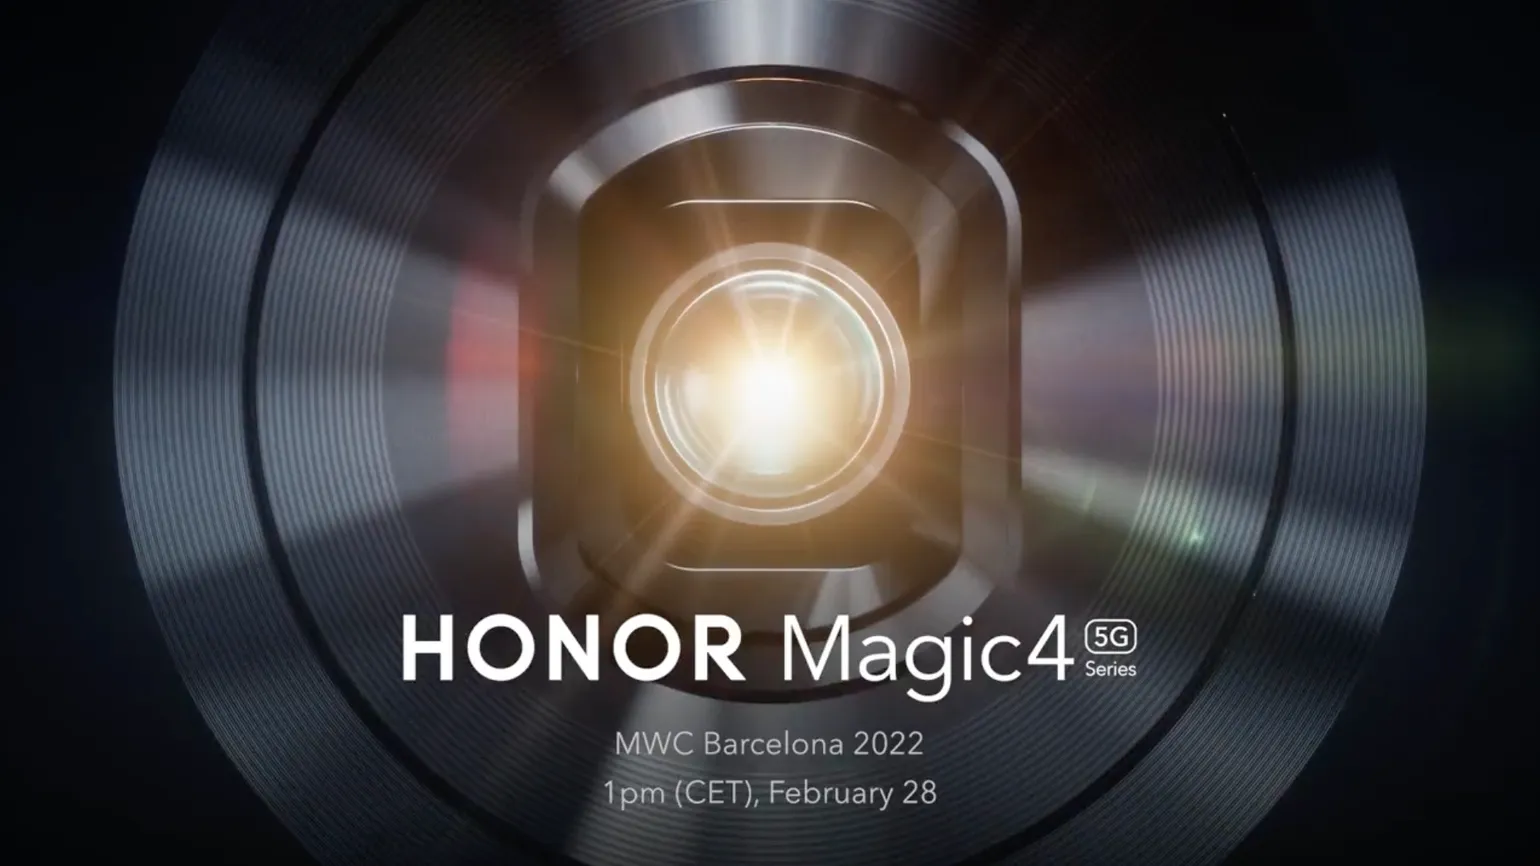 Honor Magic4 to be unveiled at MWC Barcelona on 28 February 2022